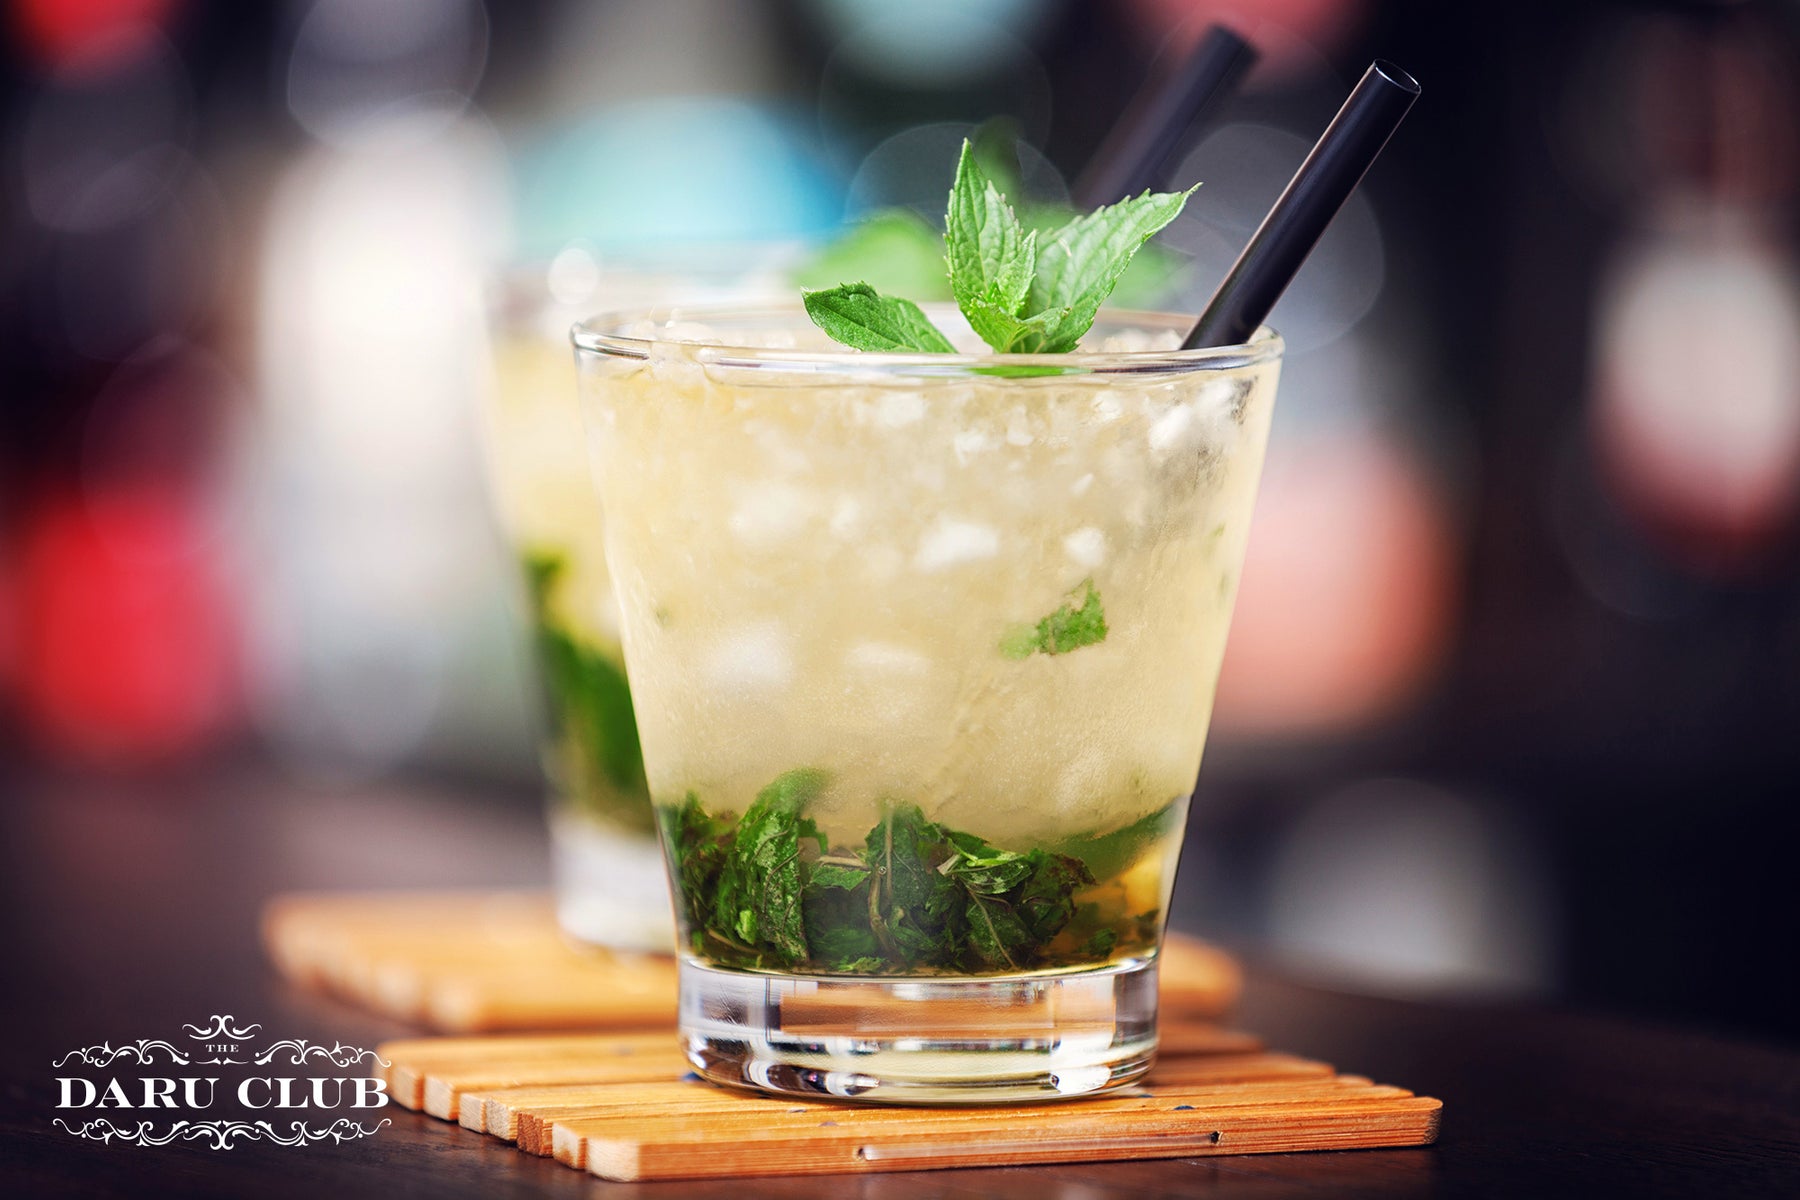 Our bets are on Mint Julep for a winning party cocktail